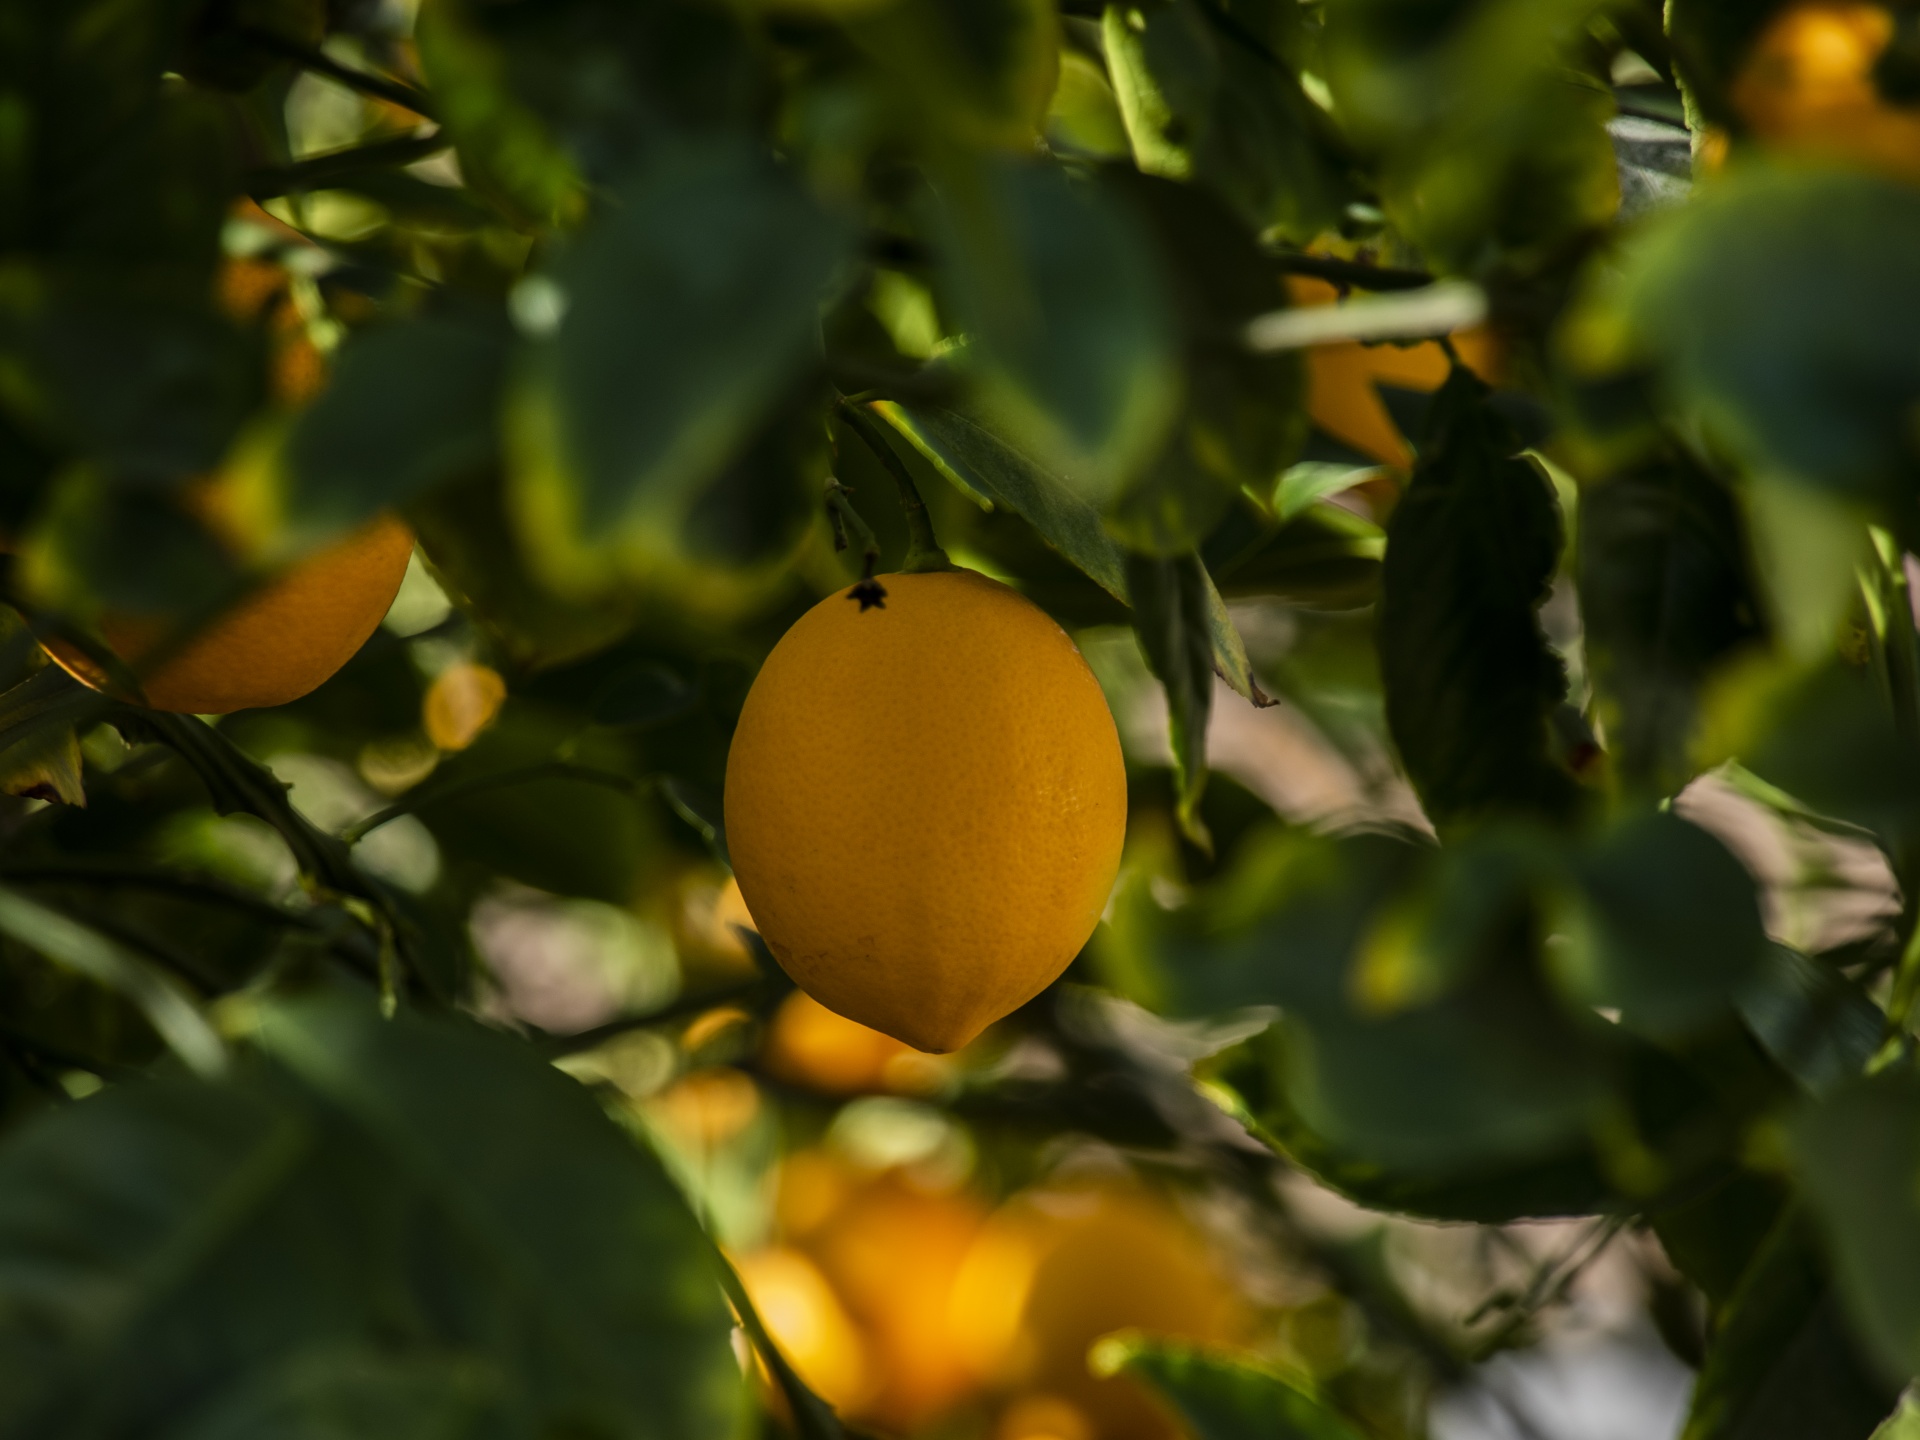 Lemons hanging from a tree